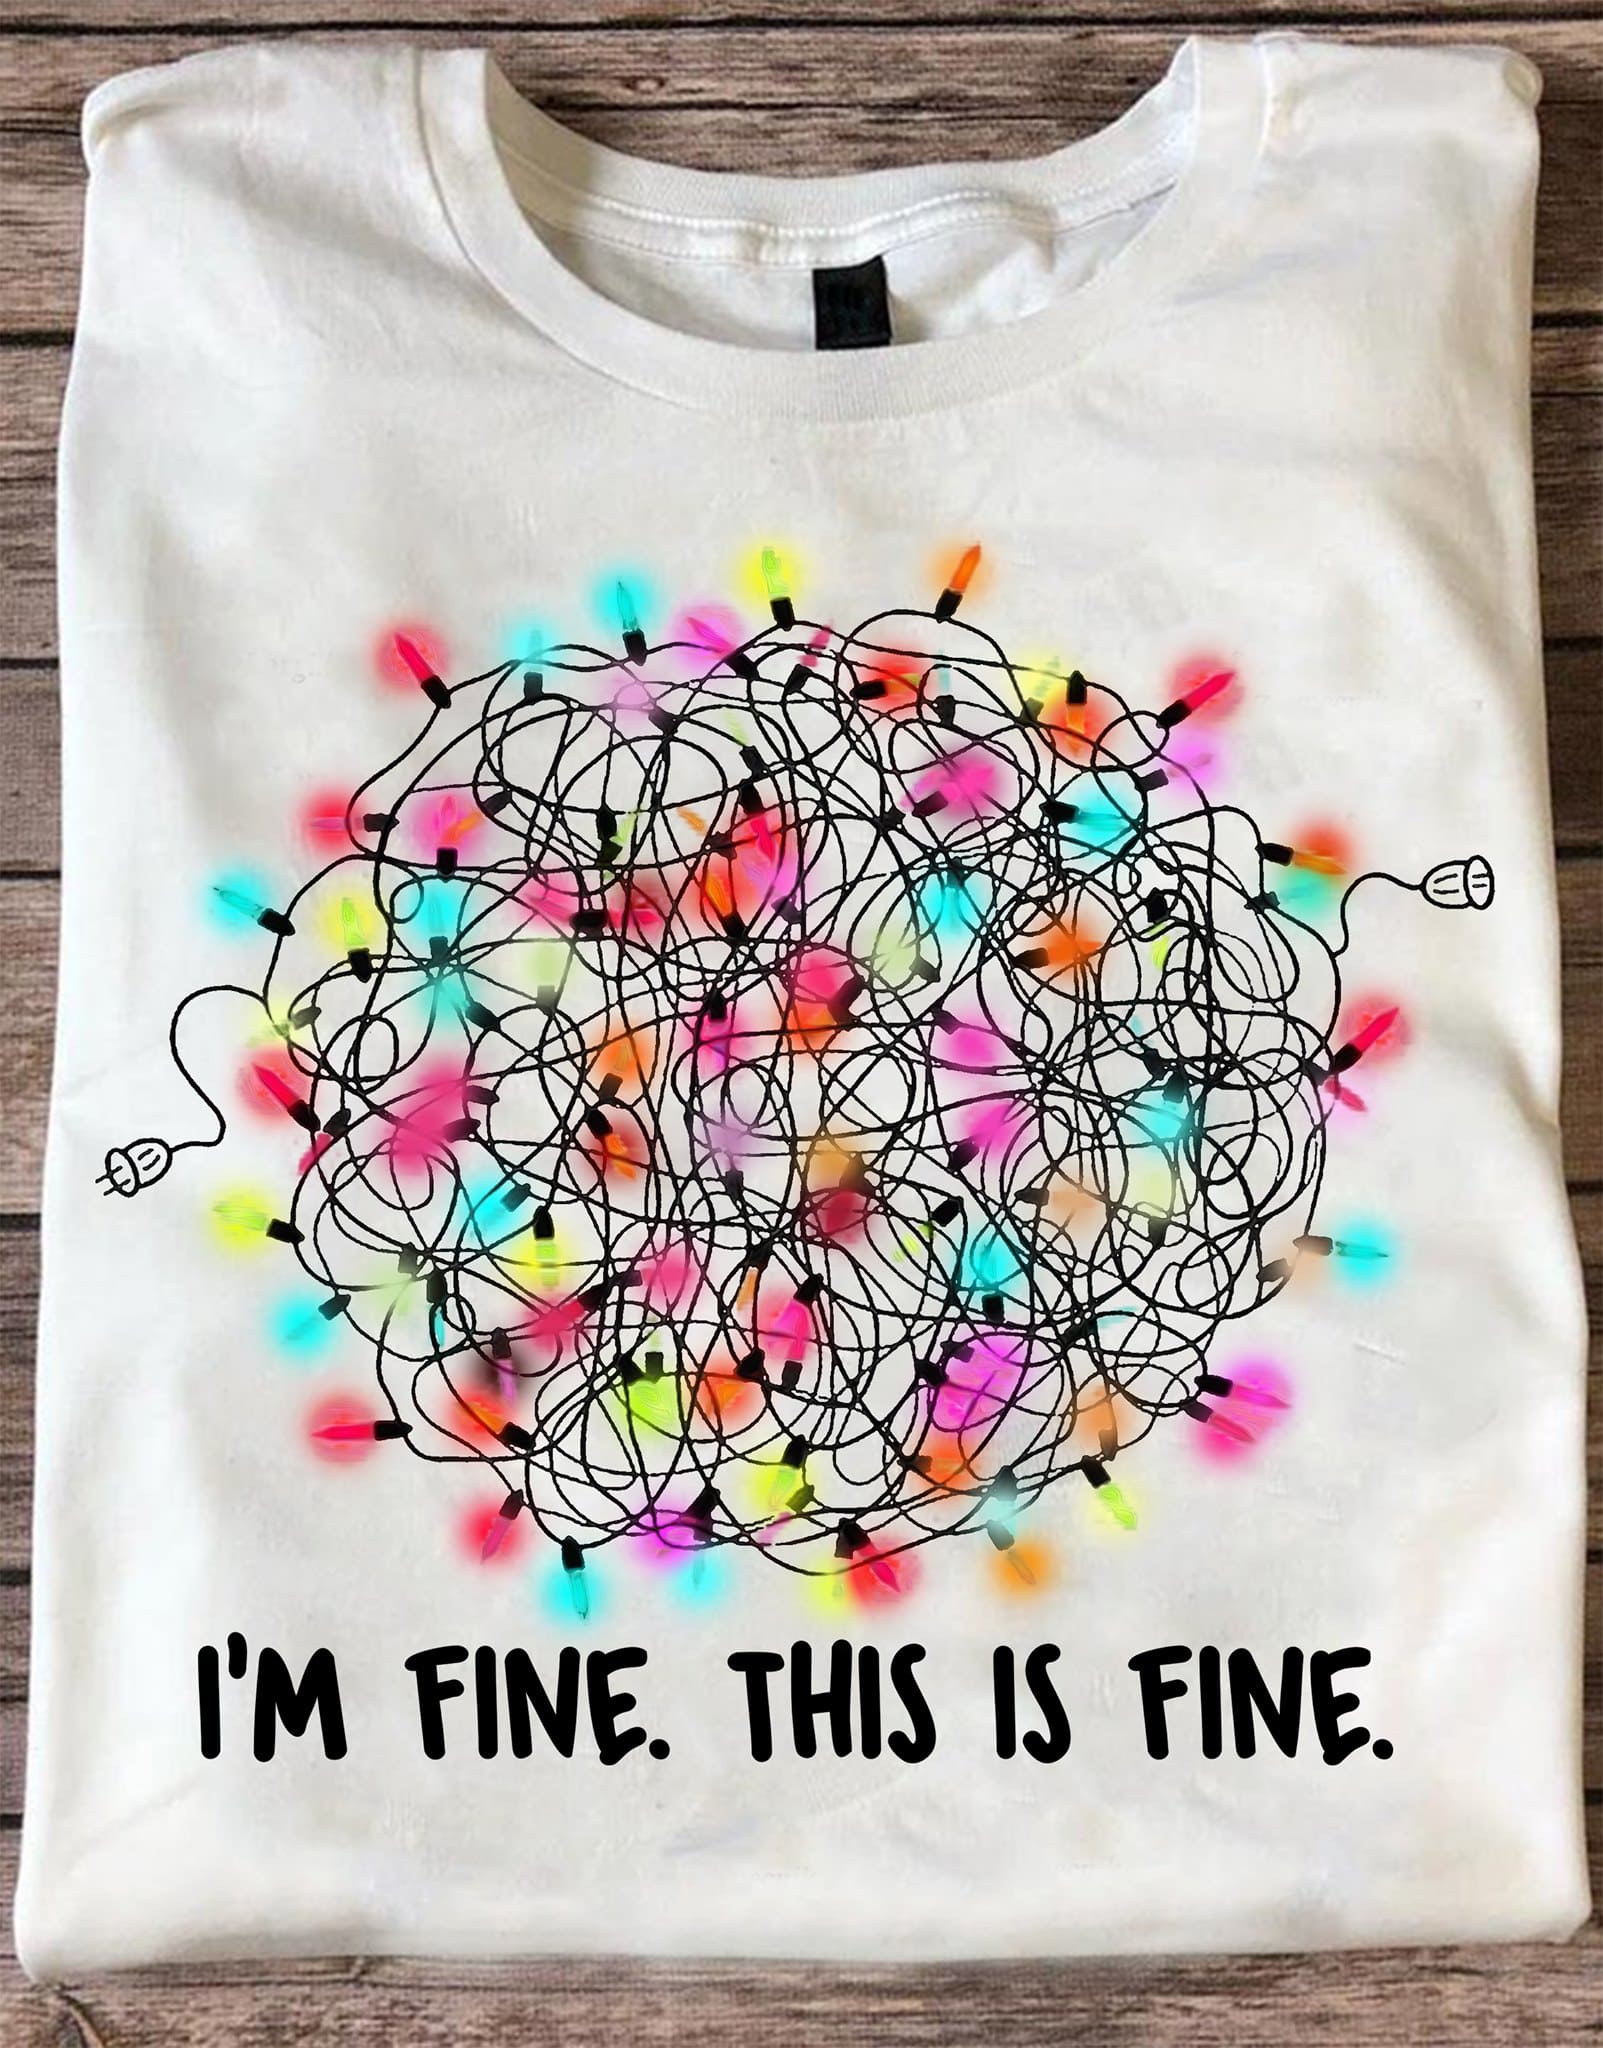 Christmas Lights - I'm fine this is fine